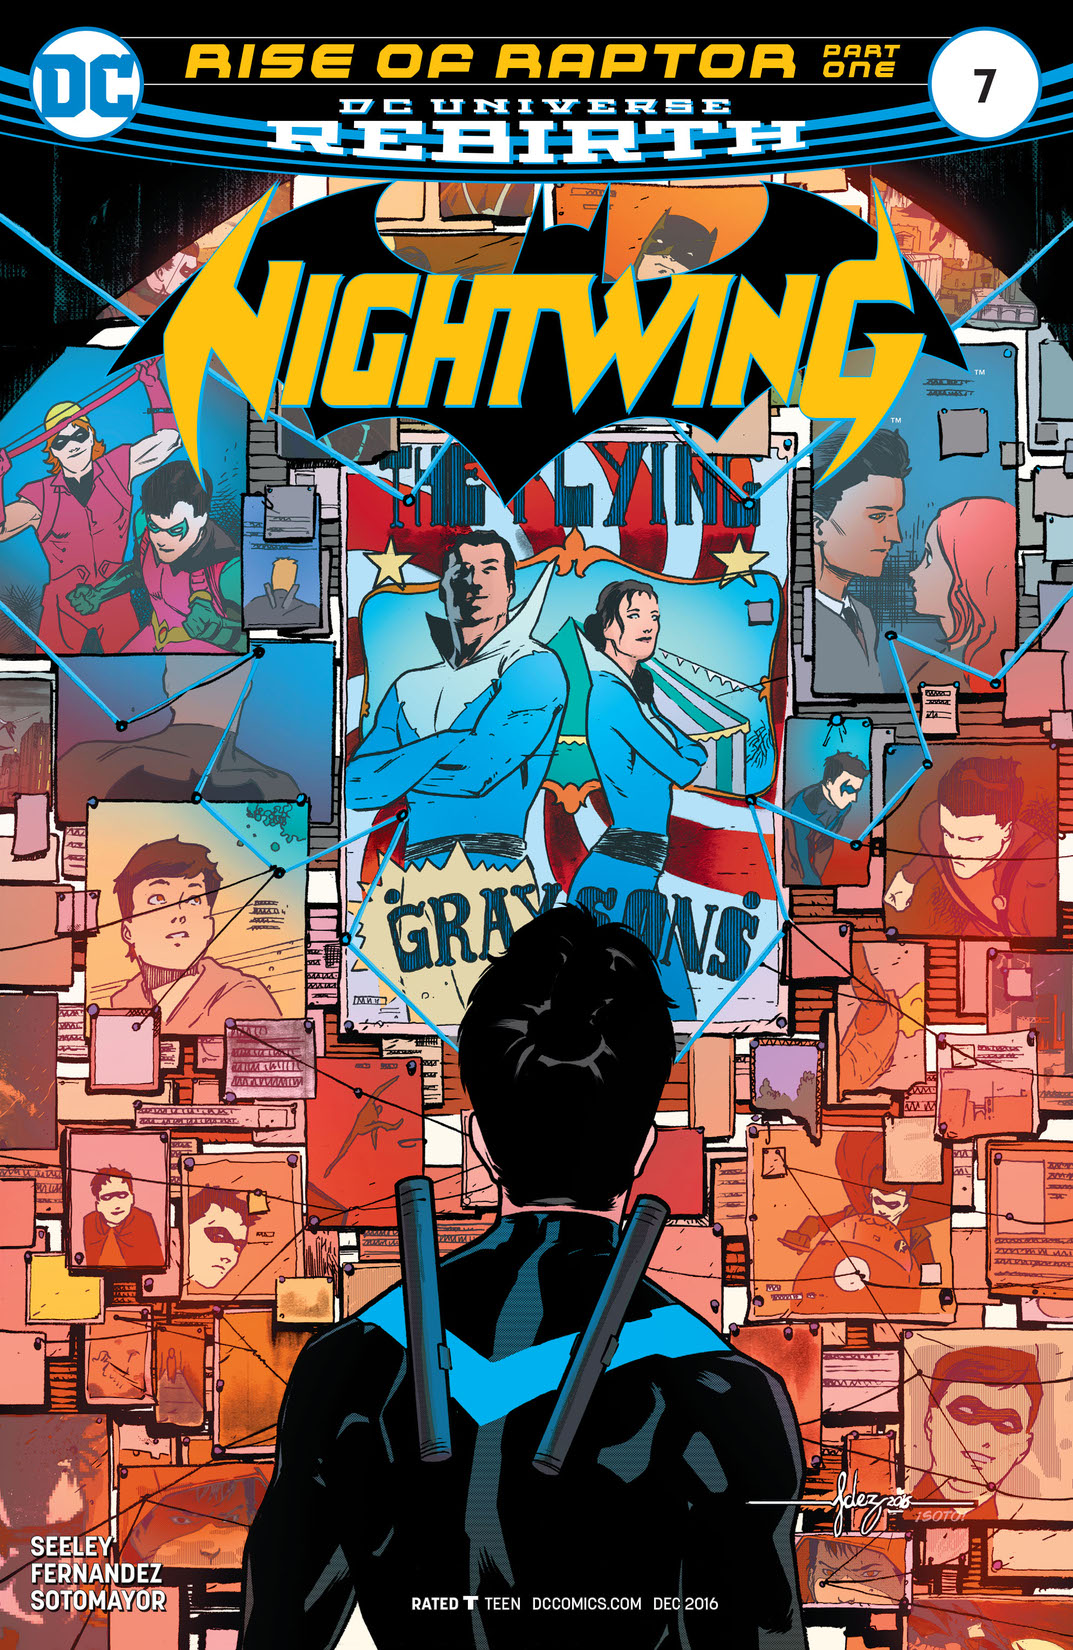 Nightwing (2016-) #7 preview images